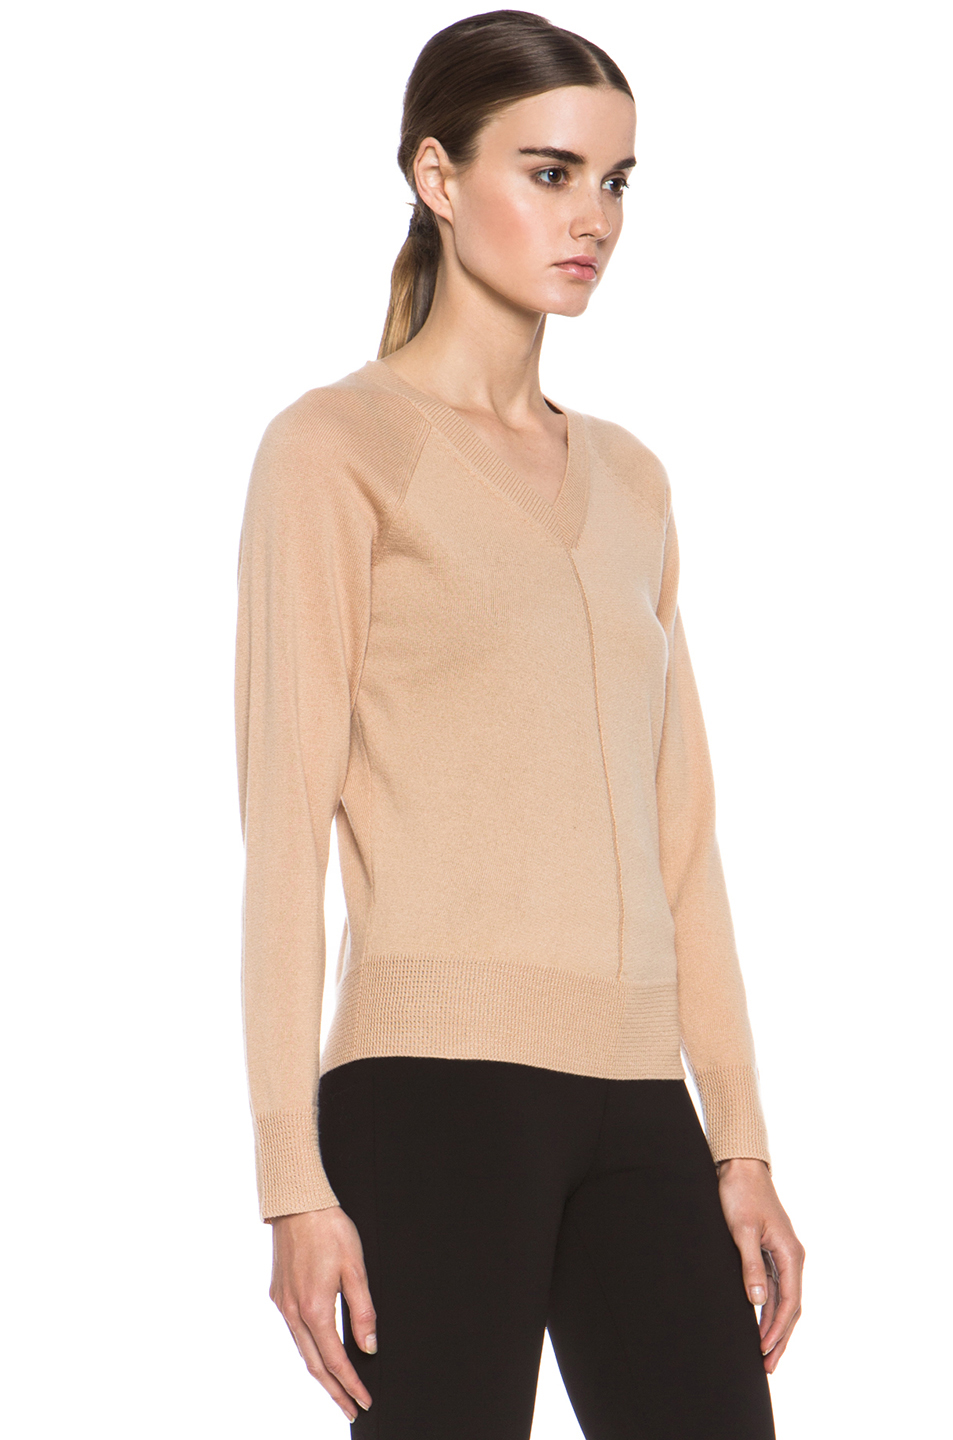 Chloe|Cashmere V Neck Sweater in Nude [3]